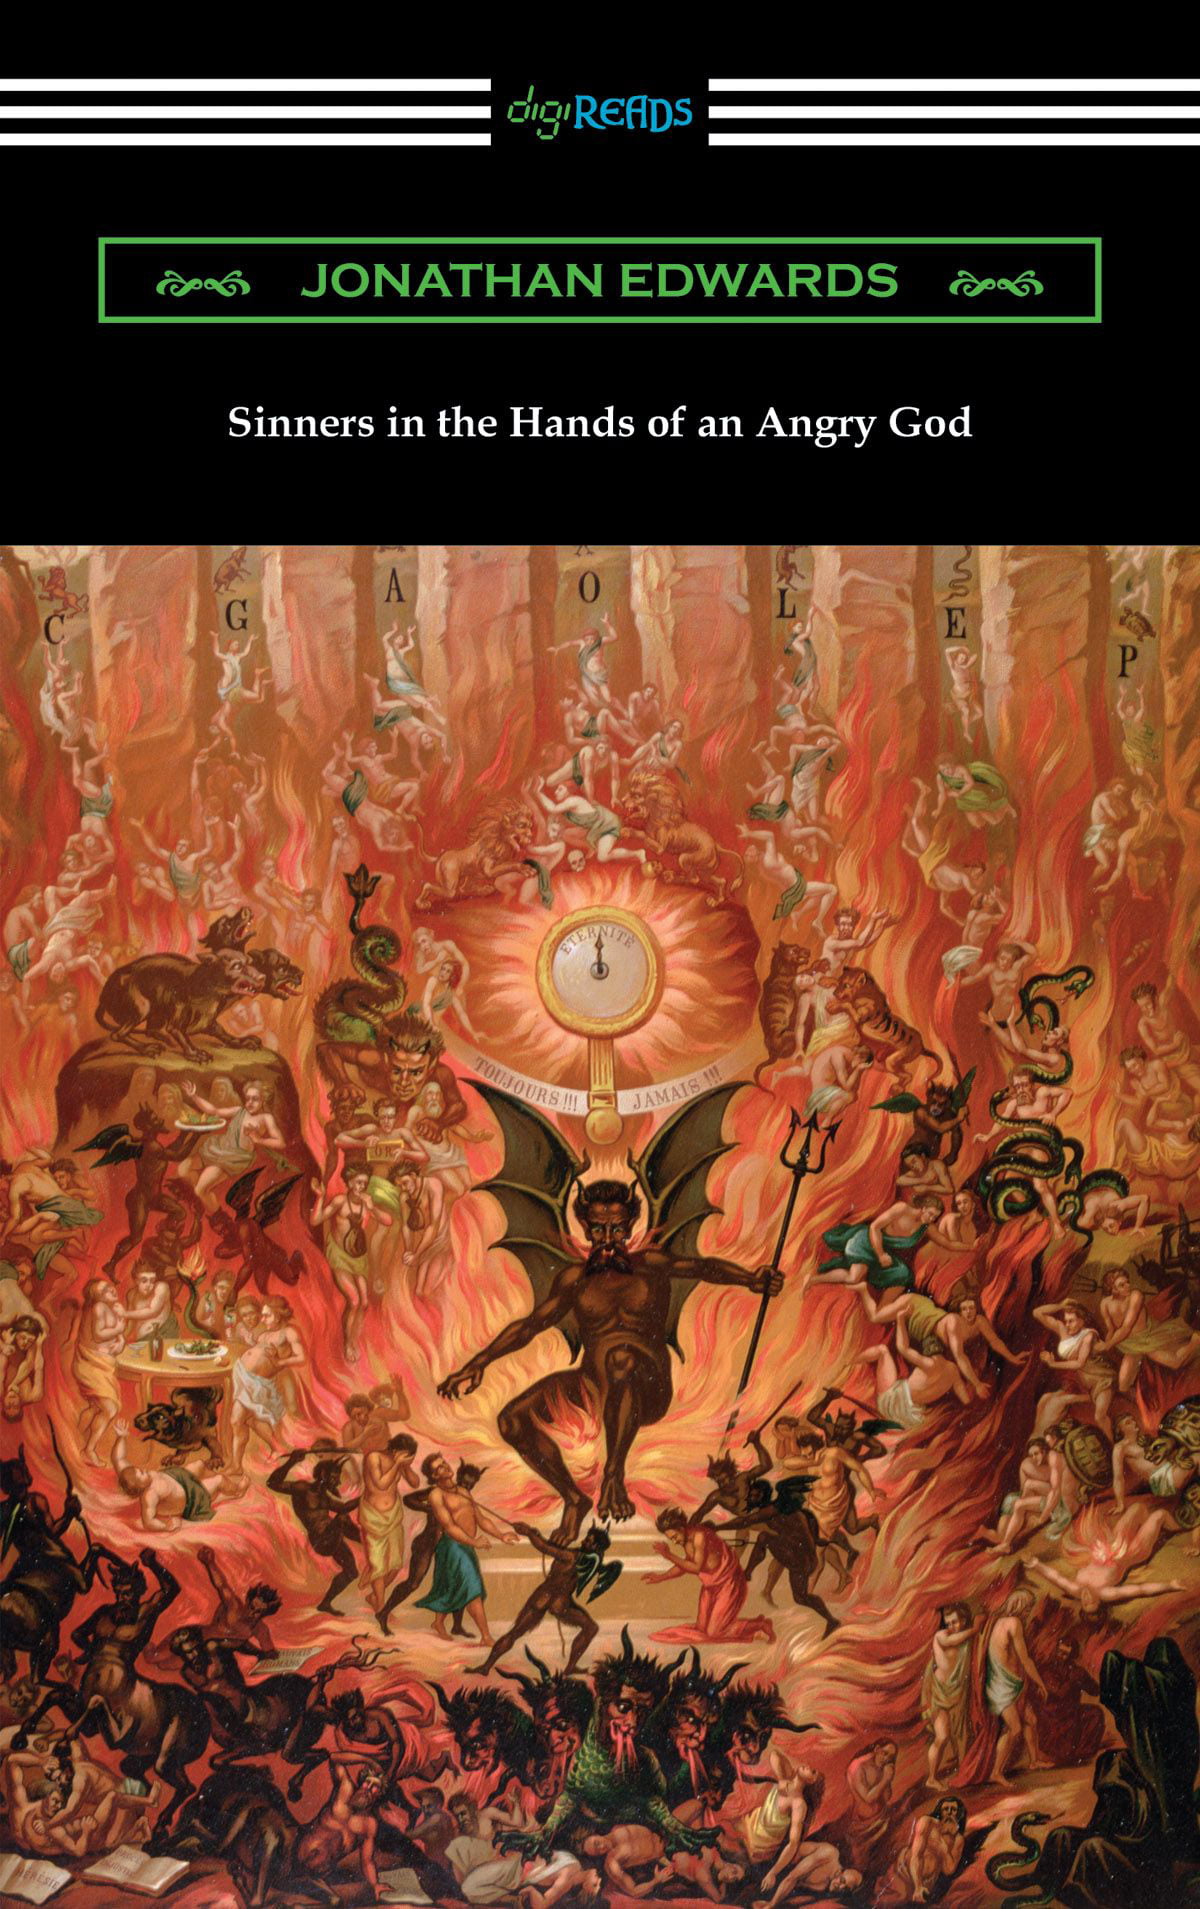 sinners-in-the-hands-of-an-angry-god-ebook-walmart-walmart